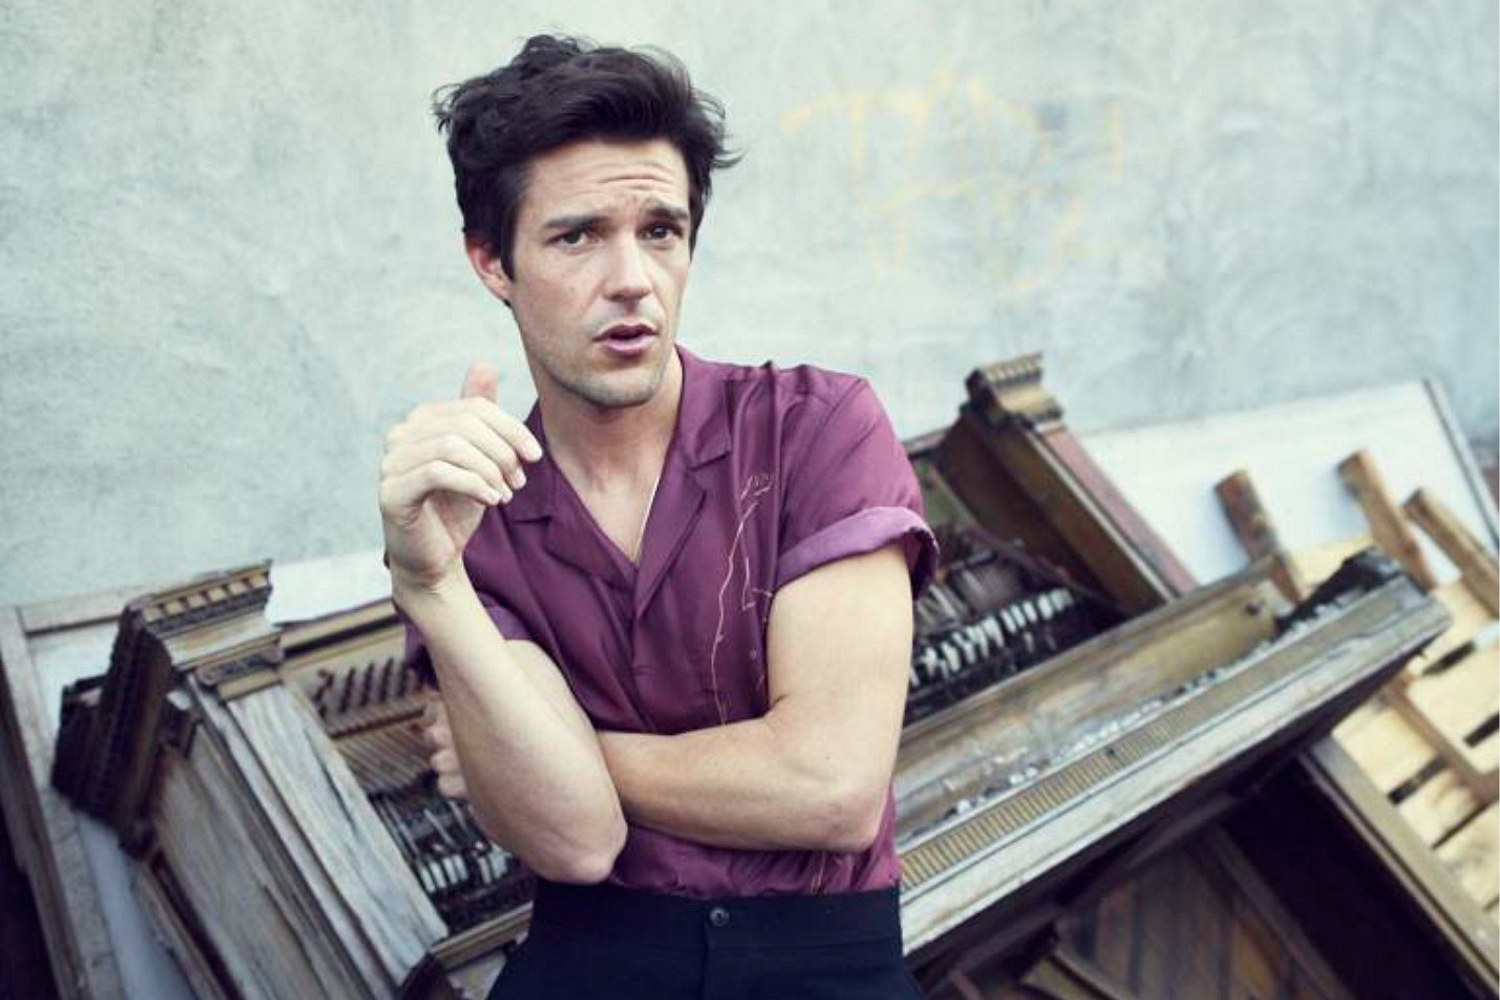 Brandon Flowers covers The White Stripes ‘Fell In Love With A Girl’ at MoPop